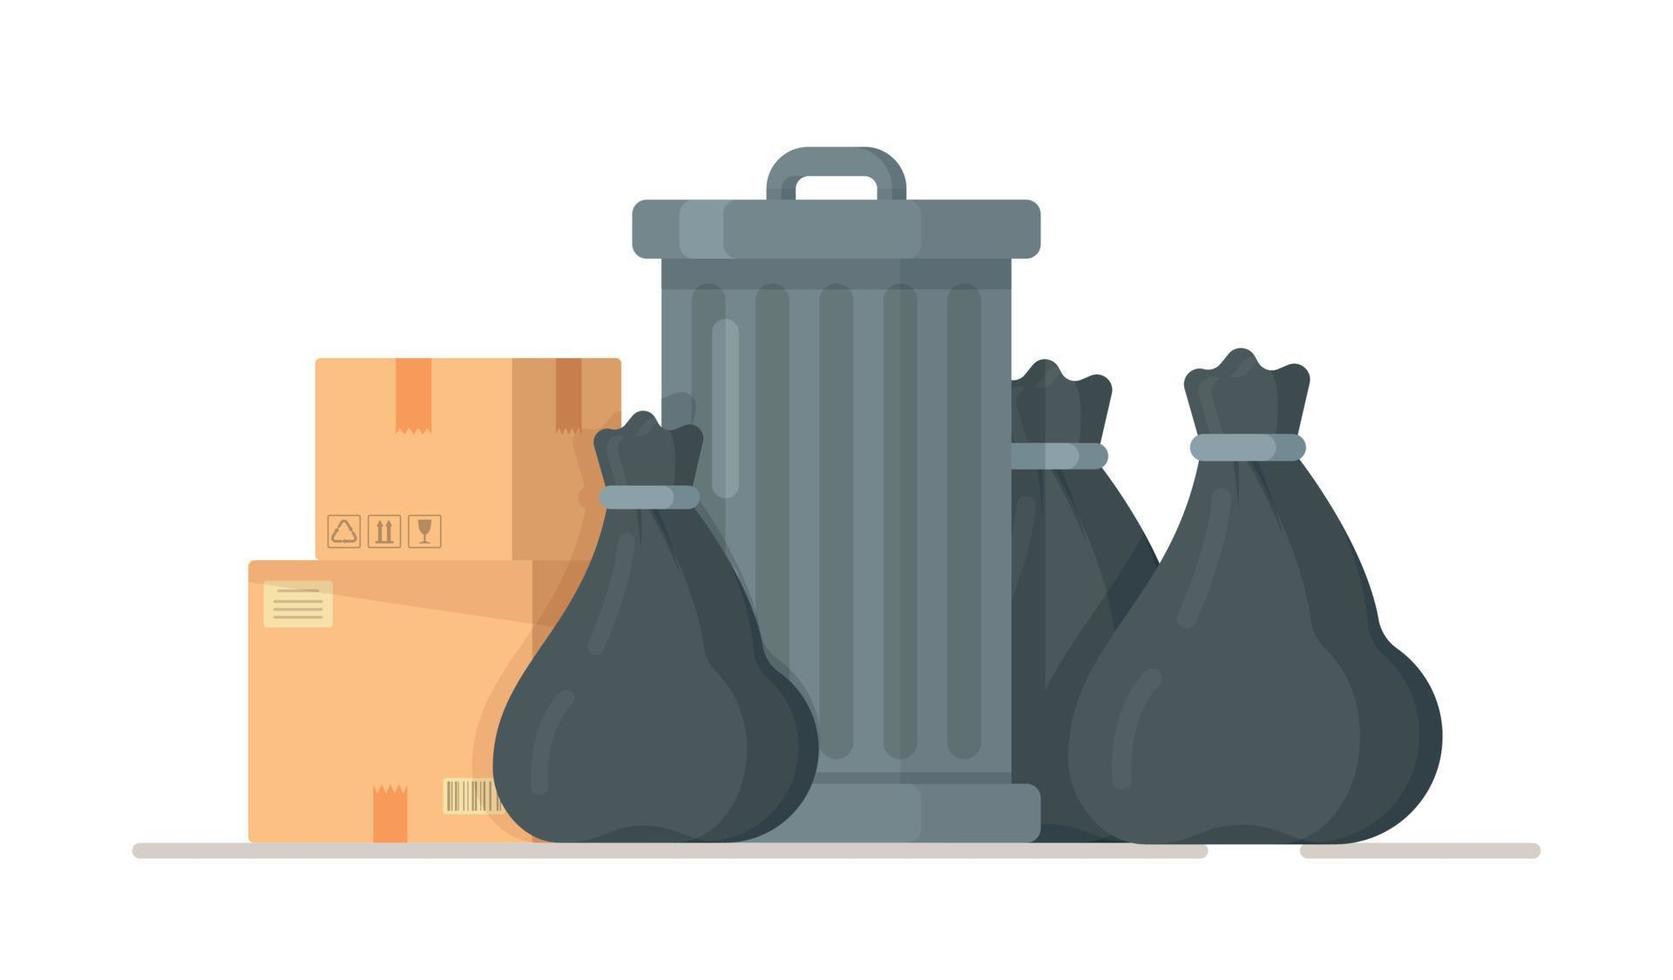 Pile of garbage bags isolated on white background. Bags full of garbage, bags and trash. Vector illustration of black trash bags standing near a trash can.